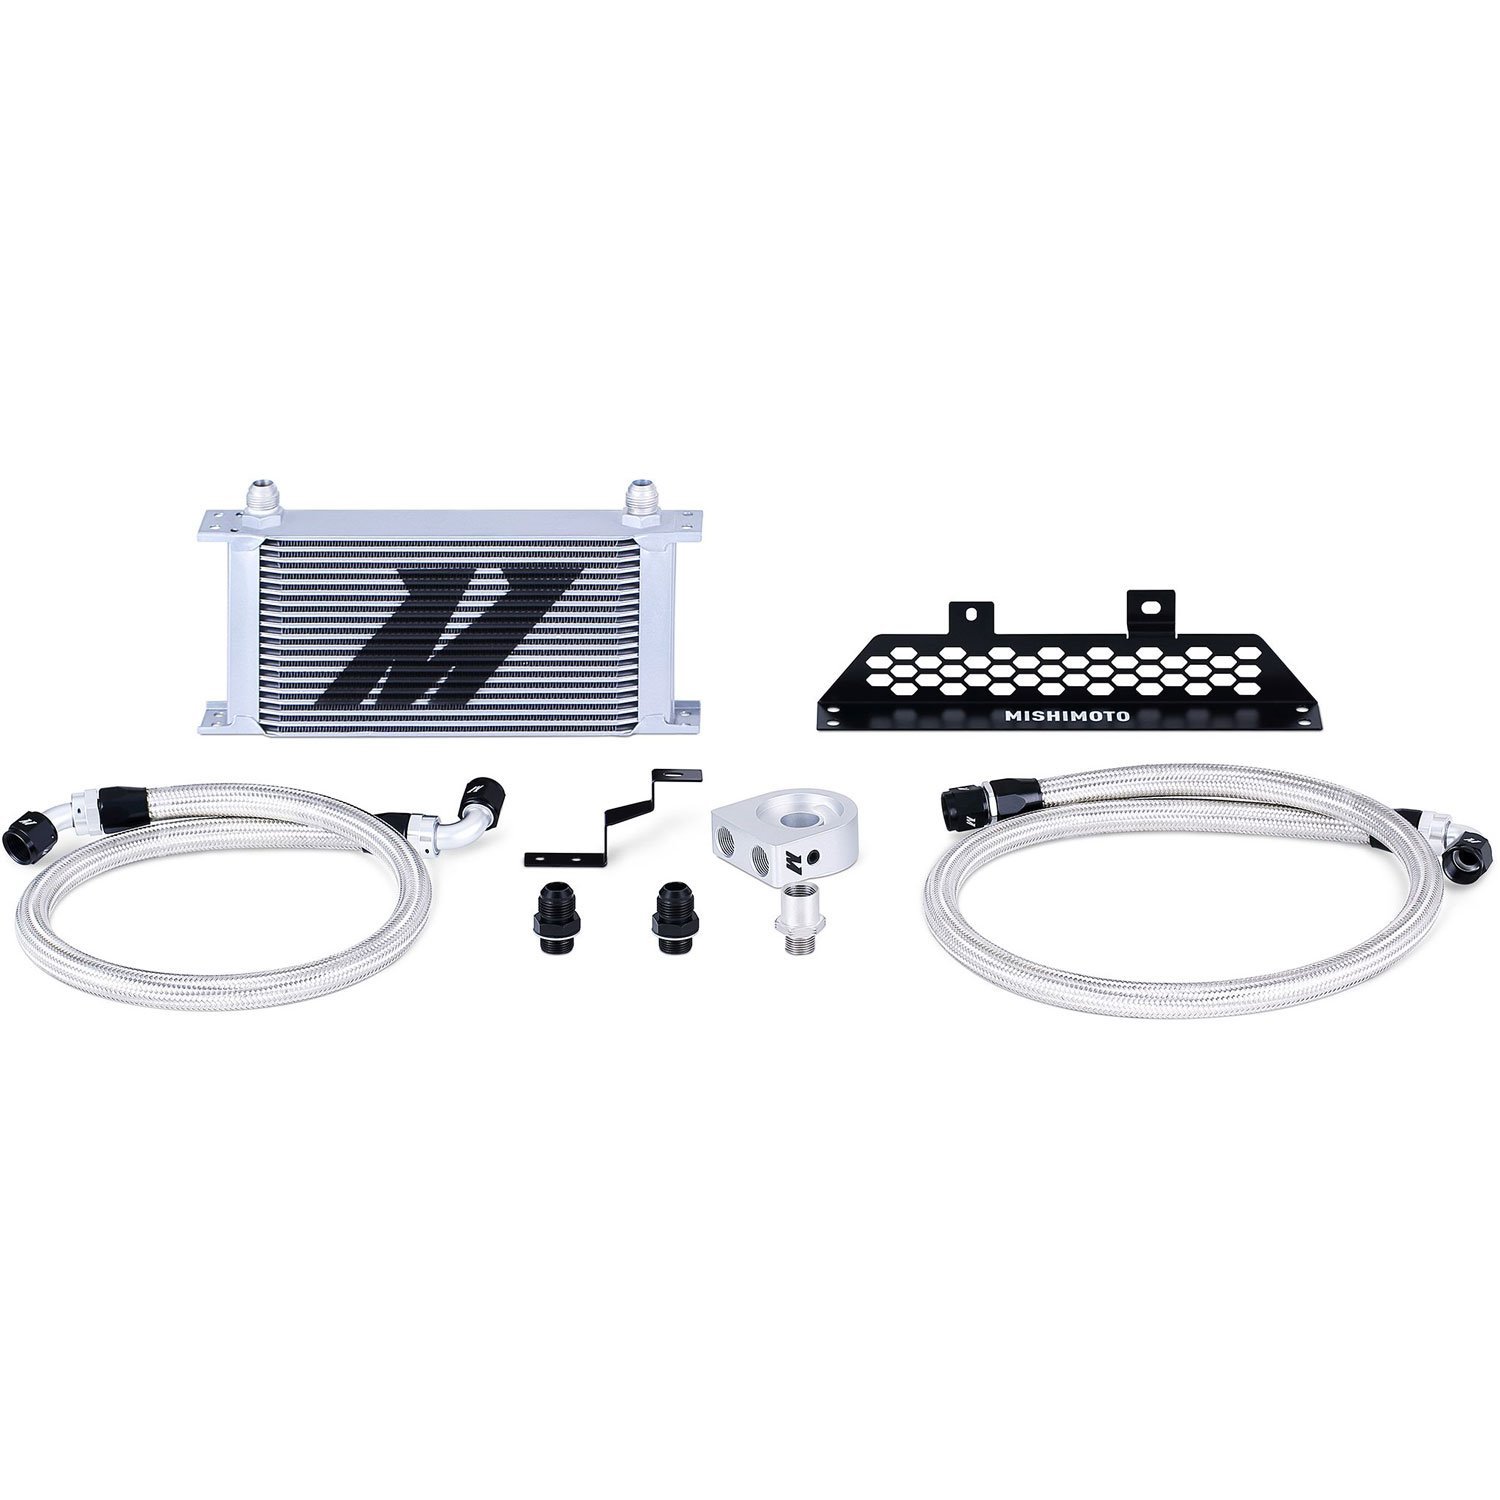 Ford Focus ST Oil Cooler Kit - MFG Part No. MMOC-FOST-13